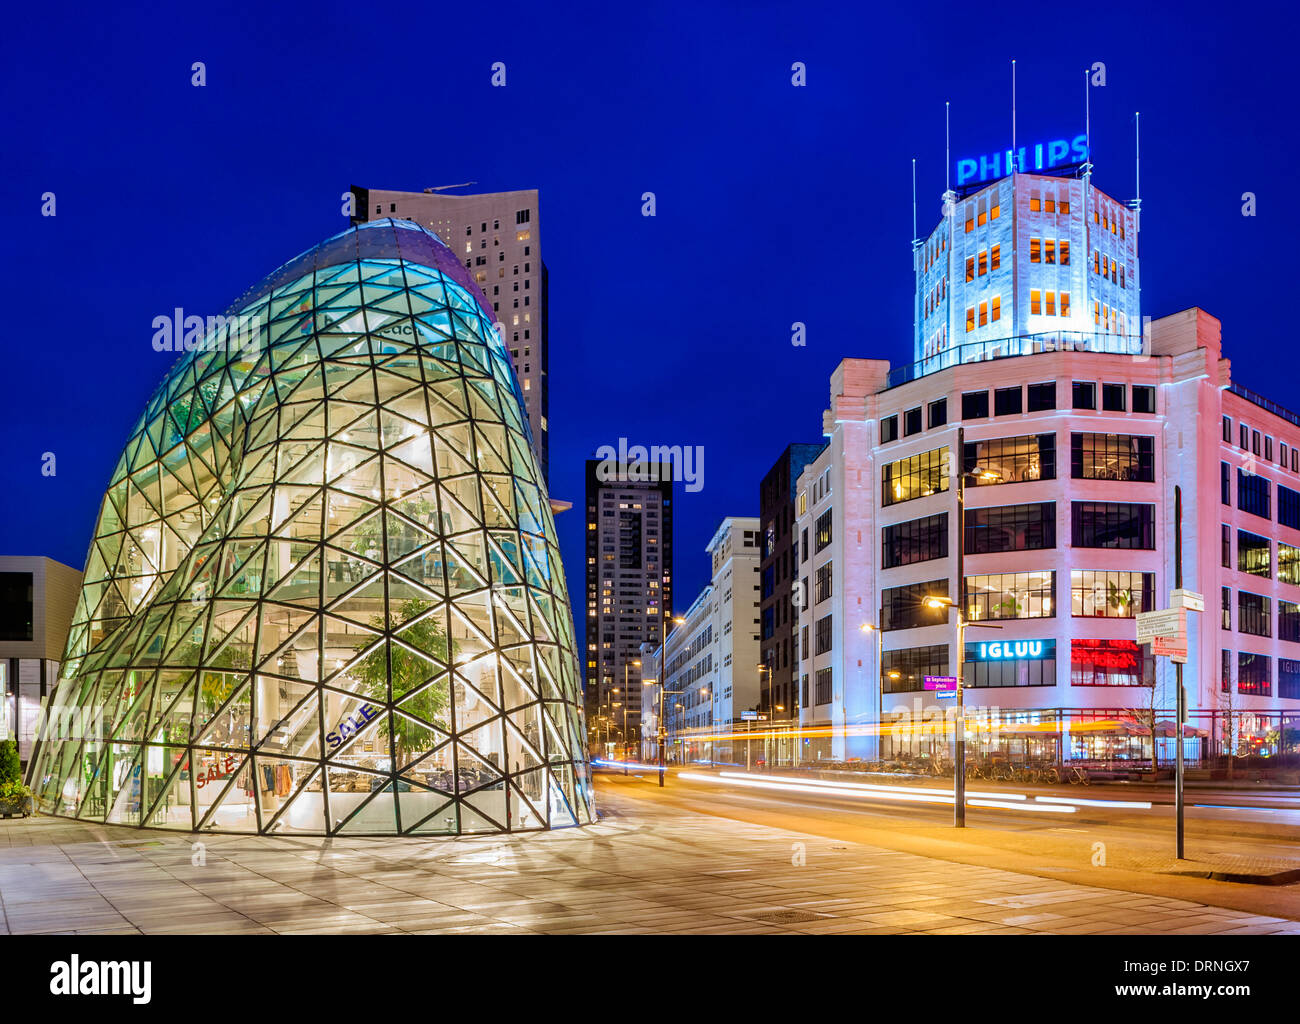 Eindhoven, Netherlands, Europe - The Blob building modern architecture in the centre of the city used as the entrance to The Admirant shopping mall Stock Photo